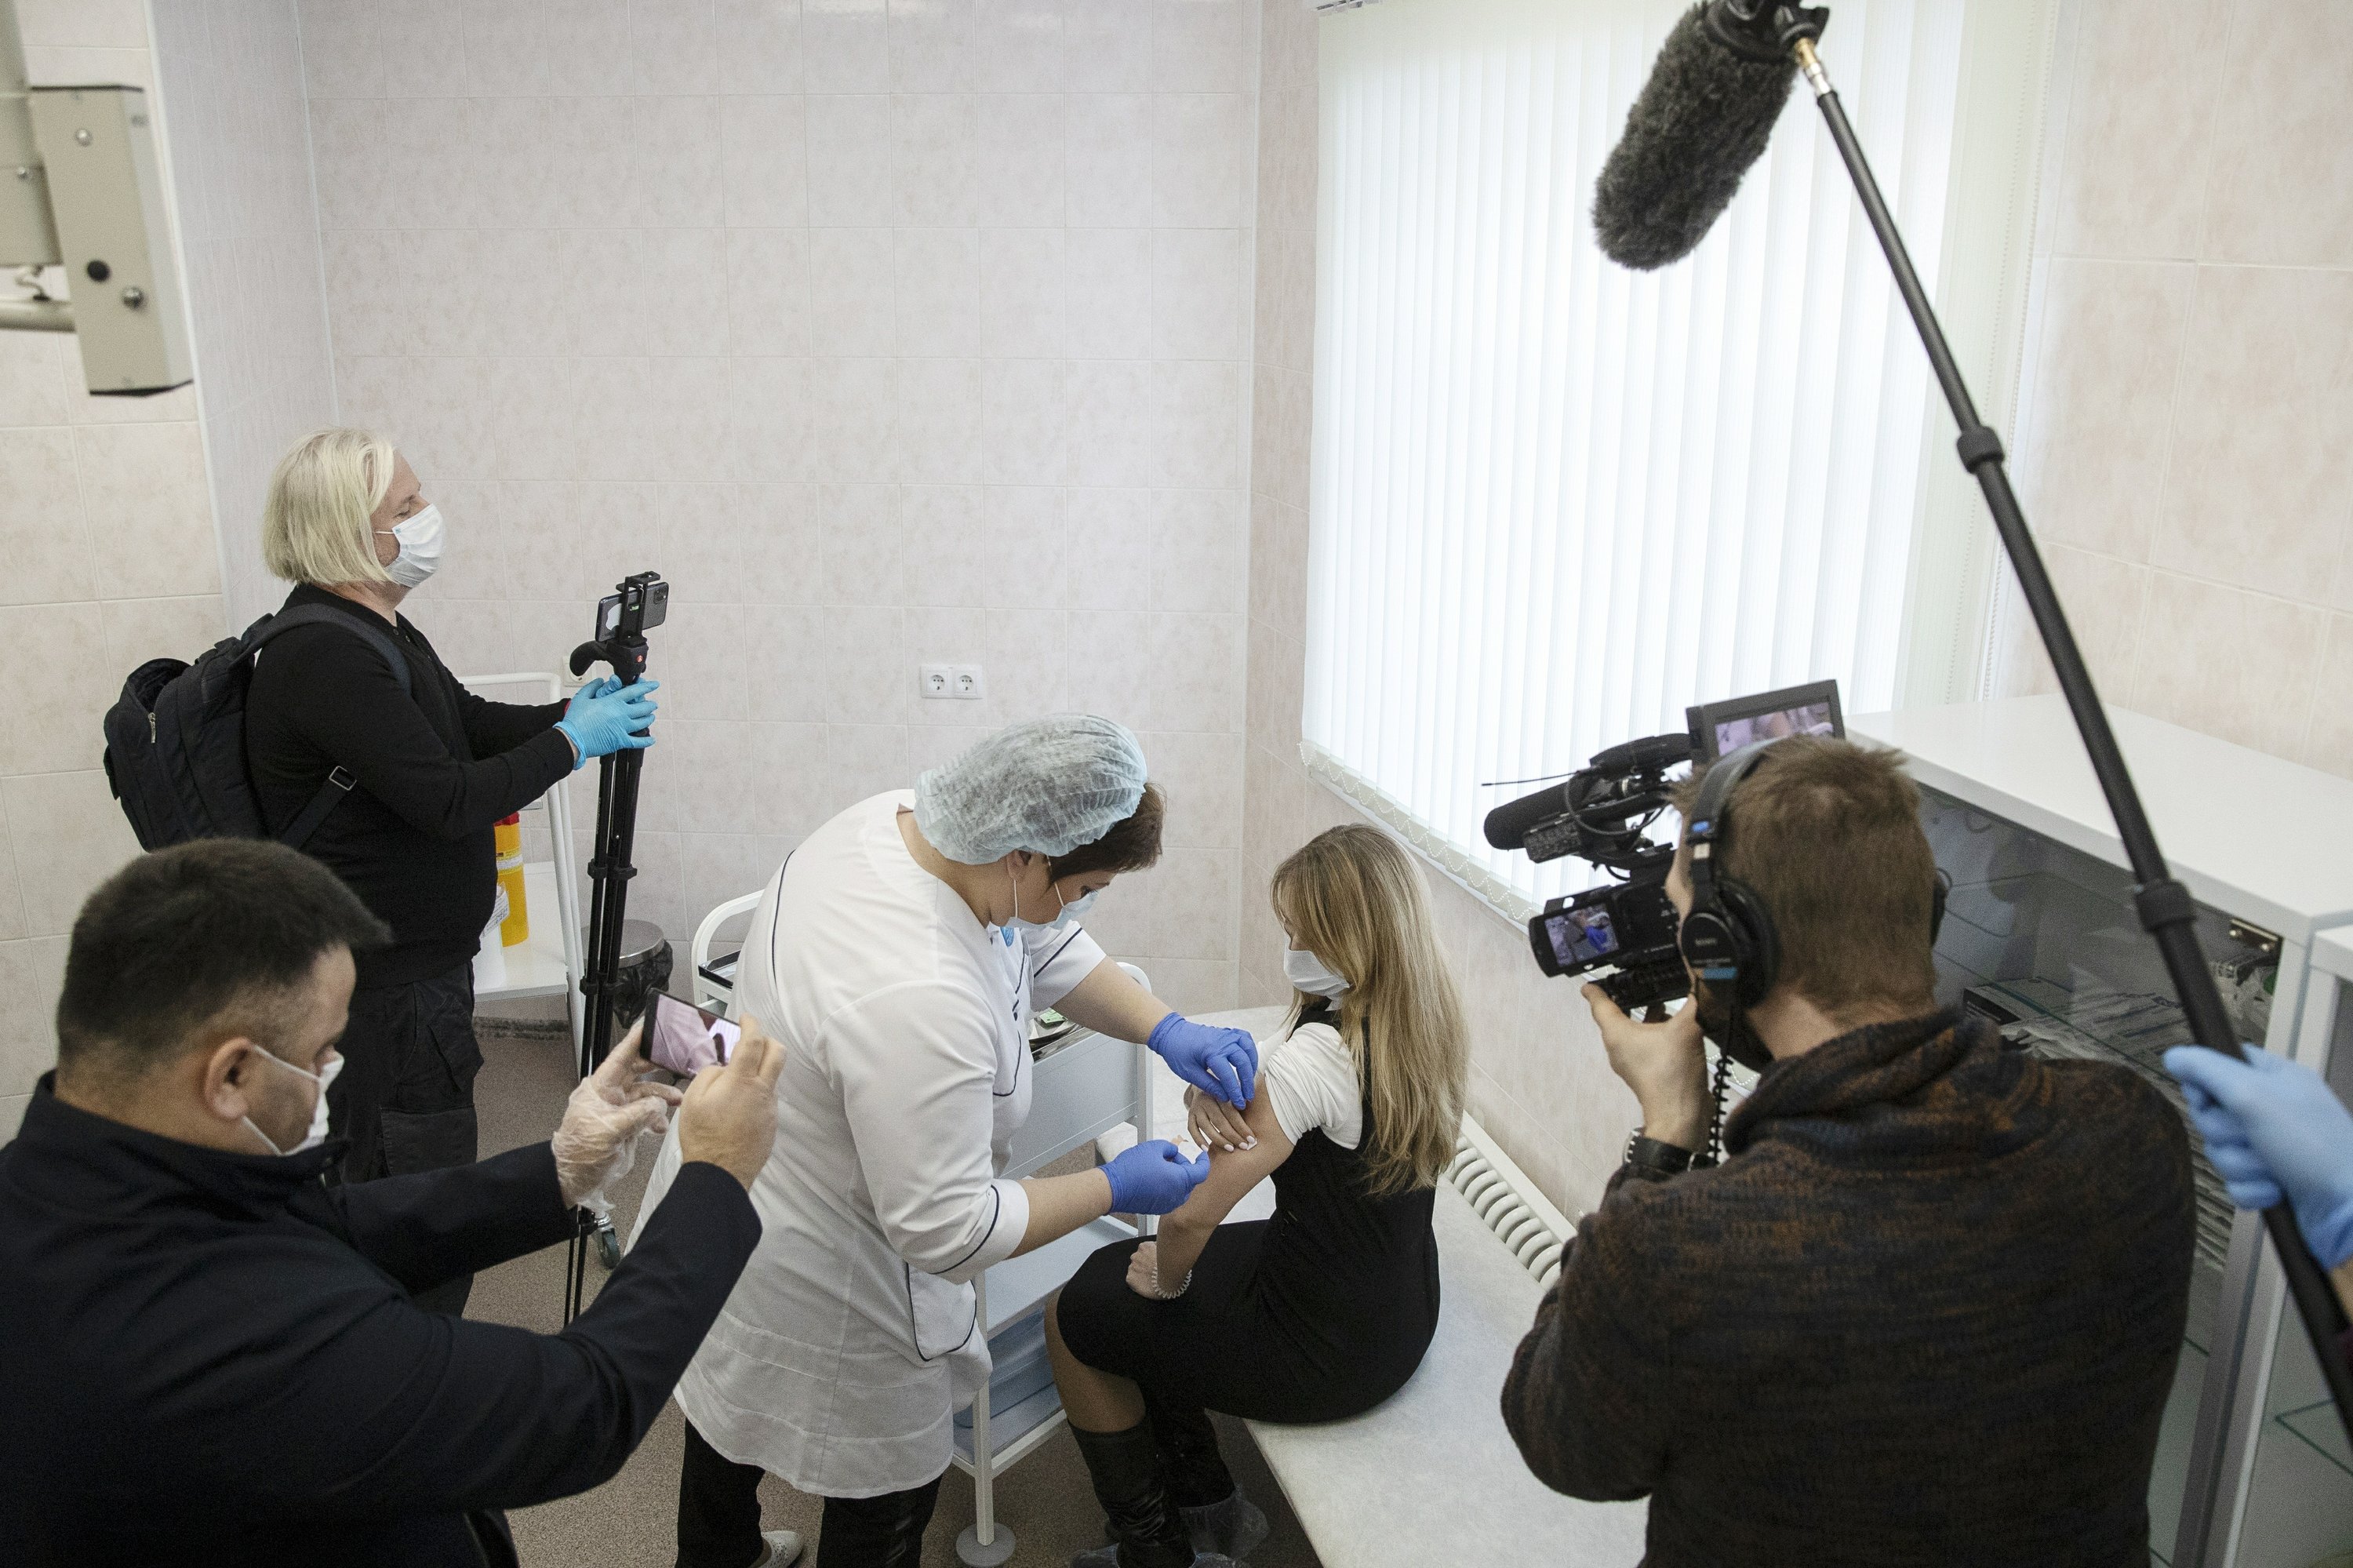 The launch of the Russian vaccine COVID-19 attracts a cautious and mixed response